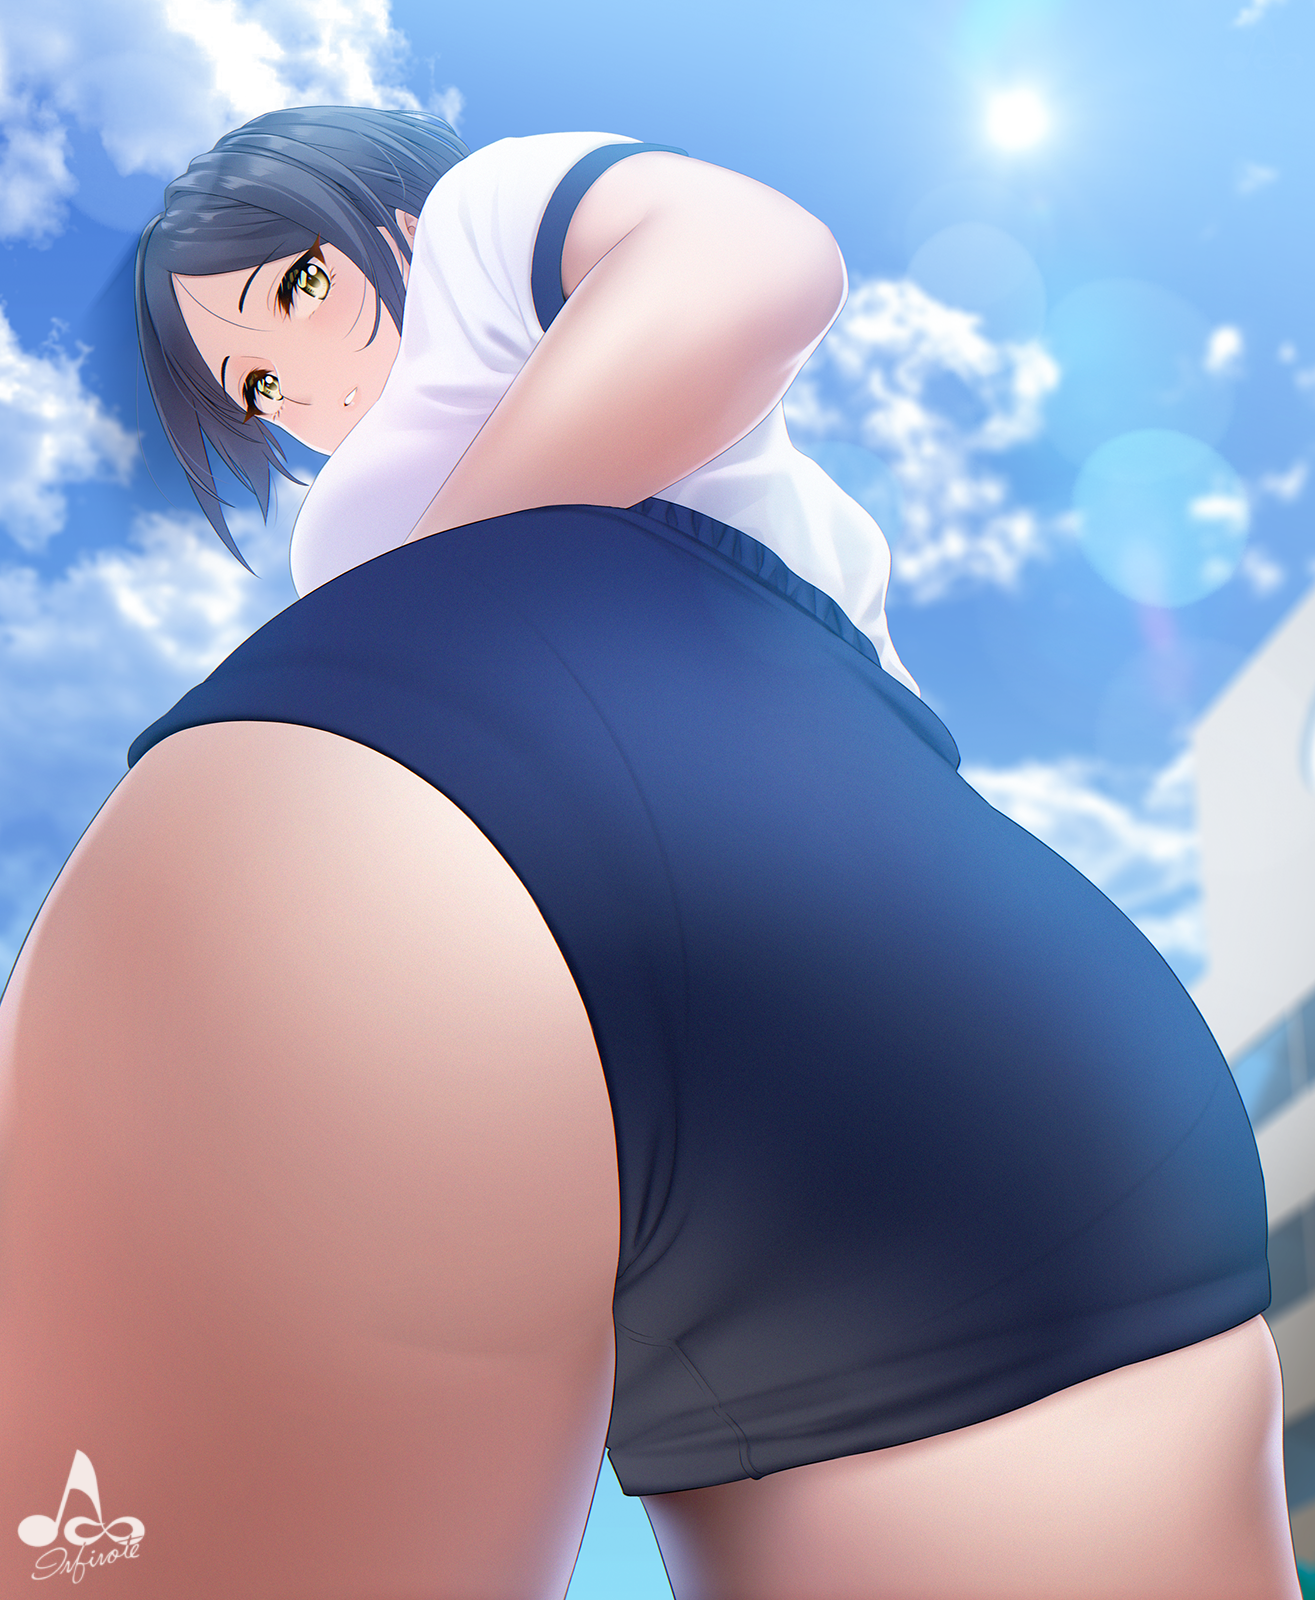 Anime 1315x1600 anime anime girls digital art artwork 2D portrait display infinote THE iDOLM@STER Hayami Kanade low-angle gym clothes ass sports shorts looking back looking below